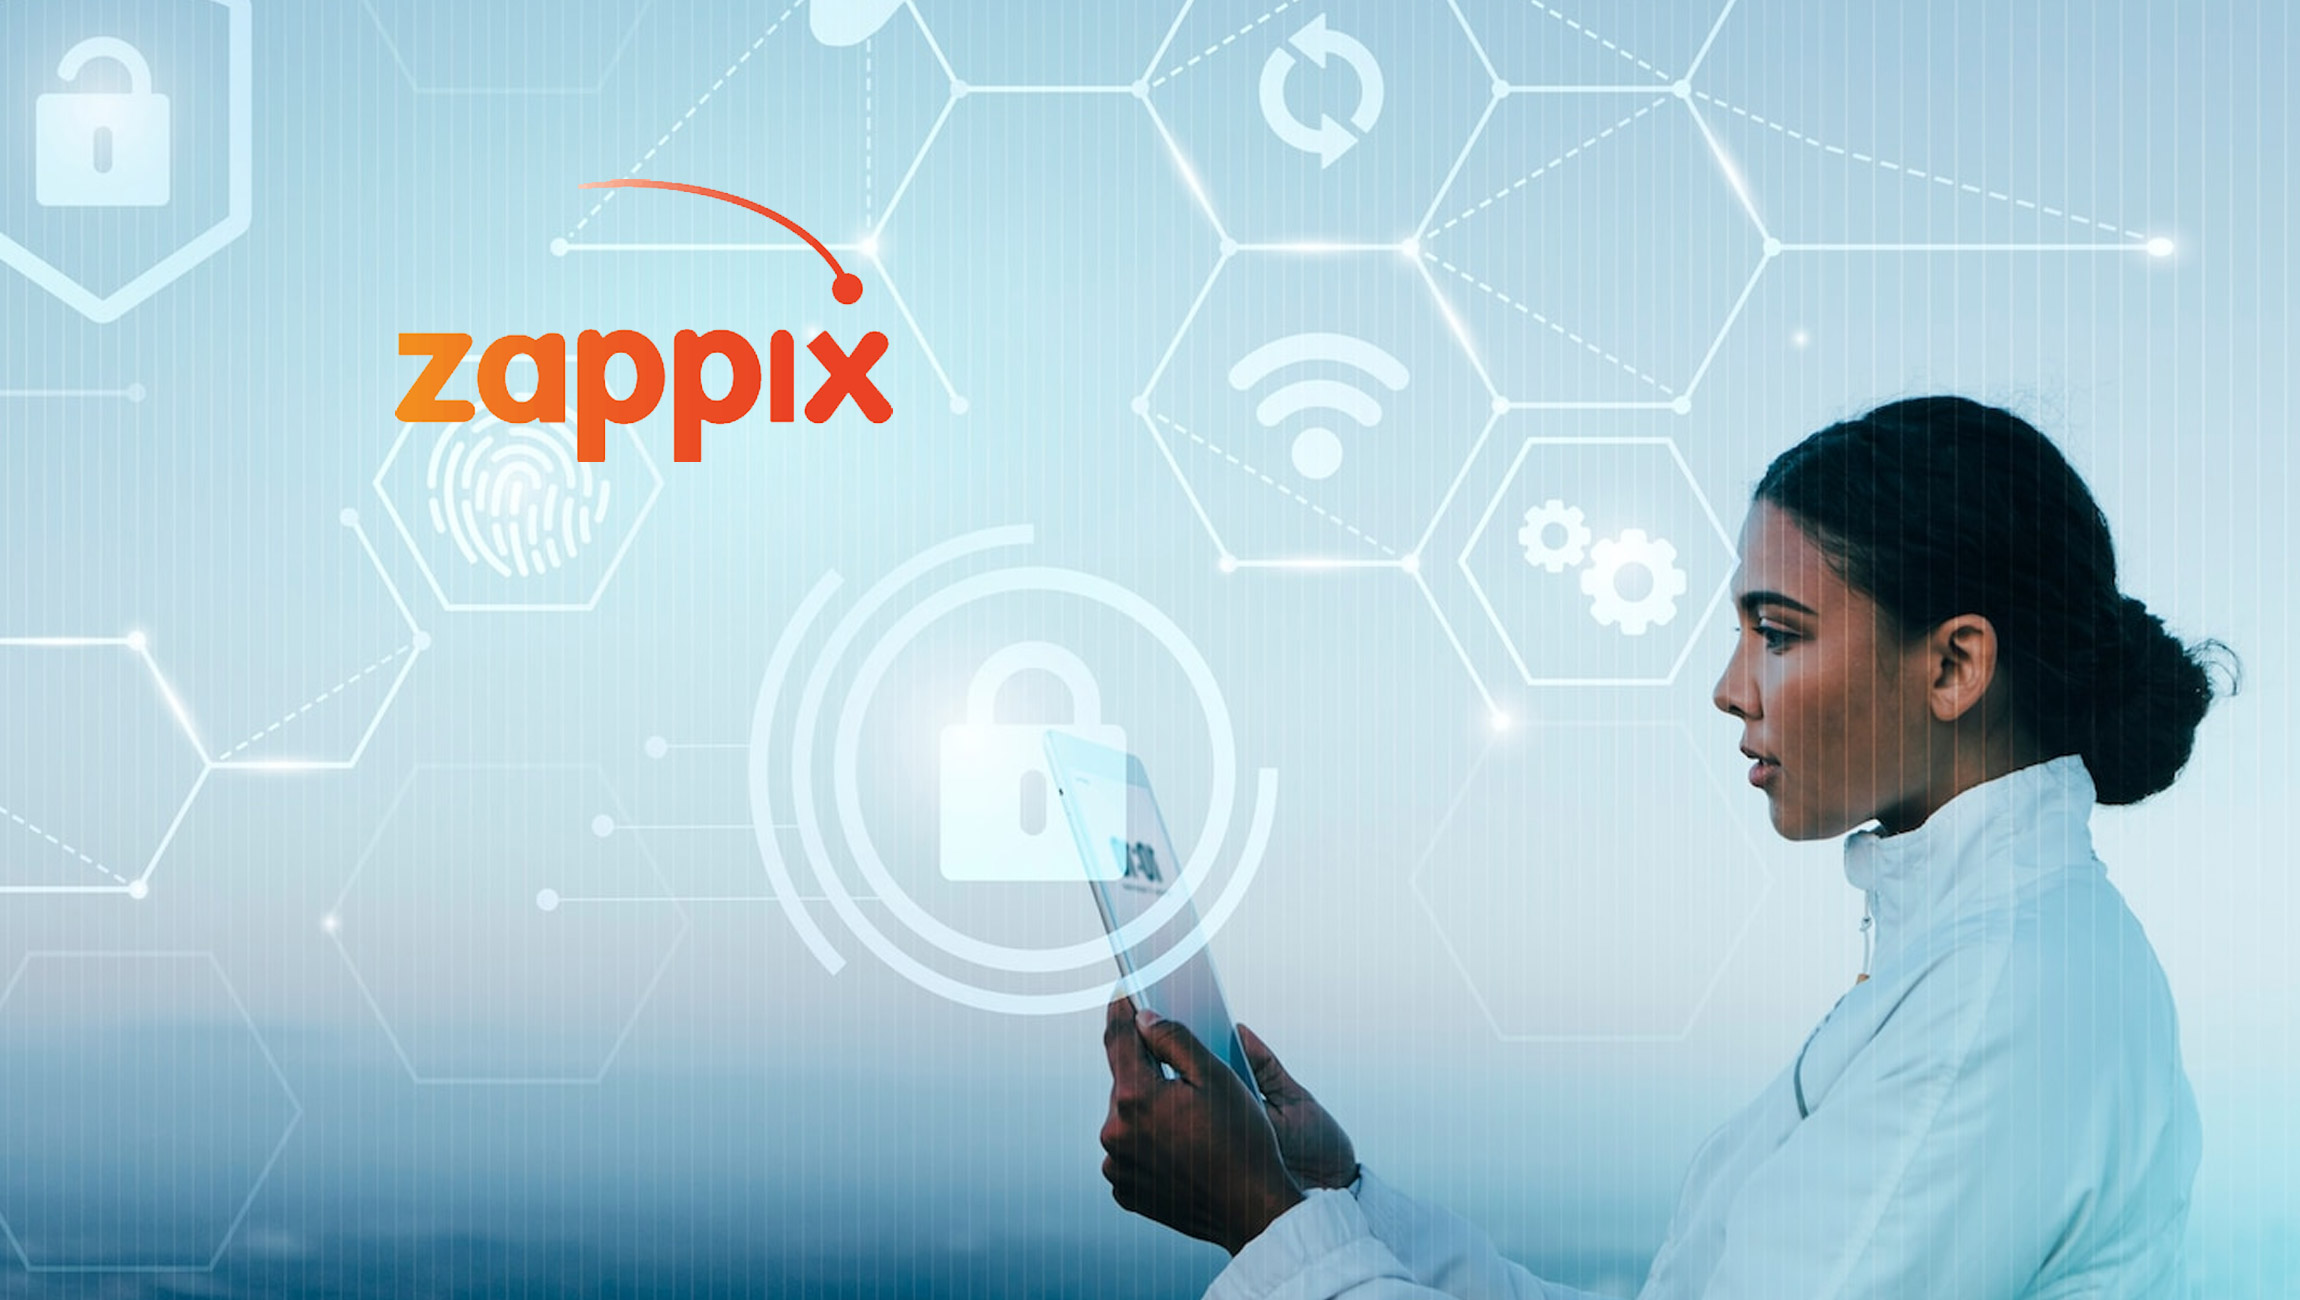 Zappix Deploys Identity Management Capabilities integrated with Visual Self-Service Solution